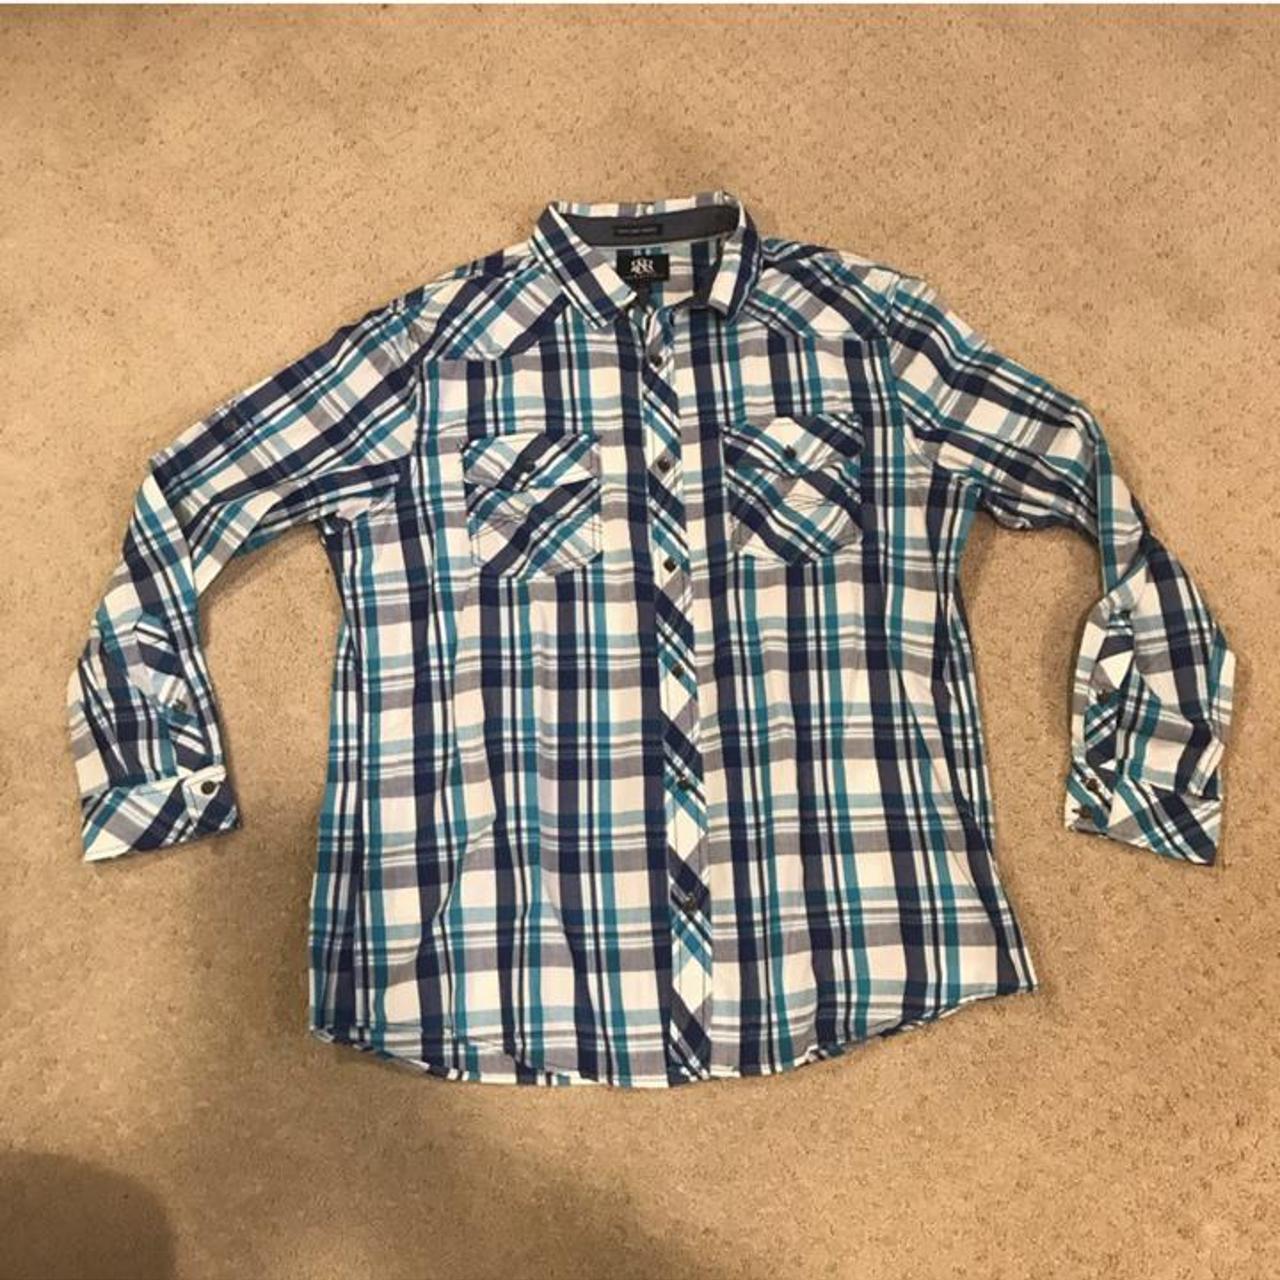 Rock and Republic Men's Blue and White Shirt